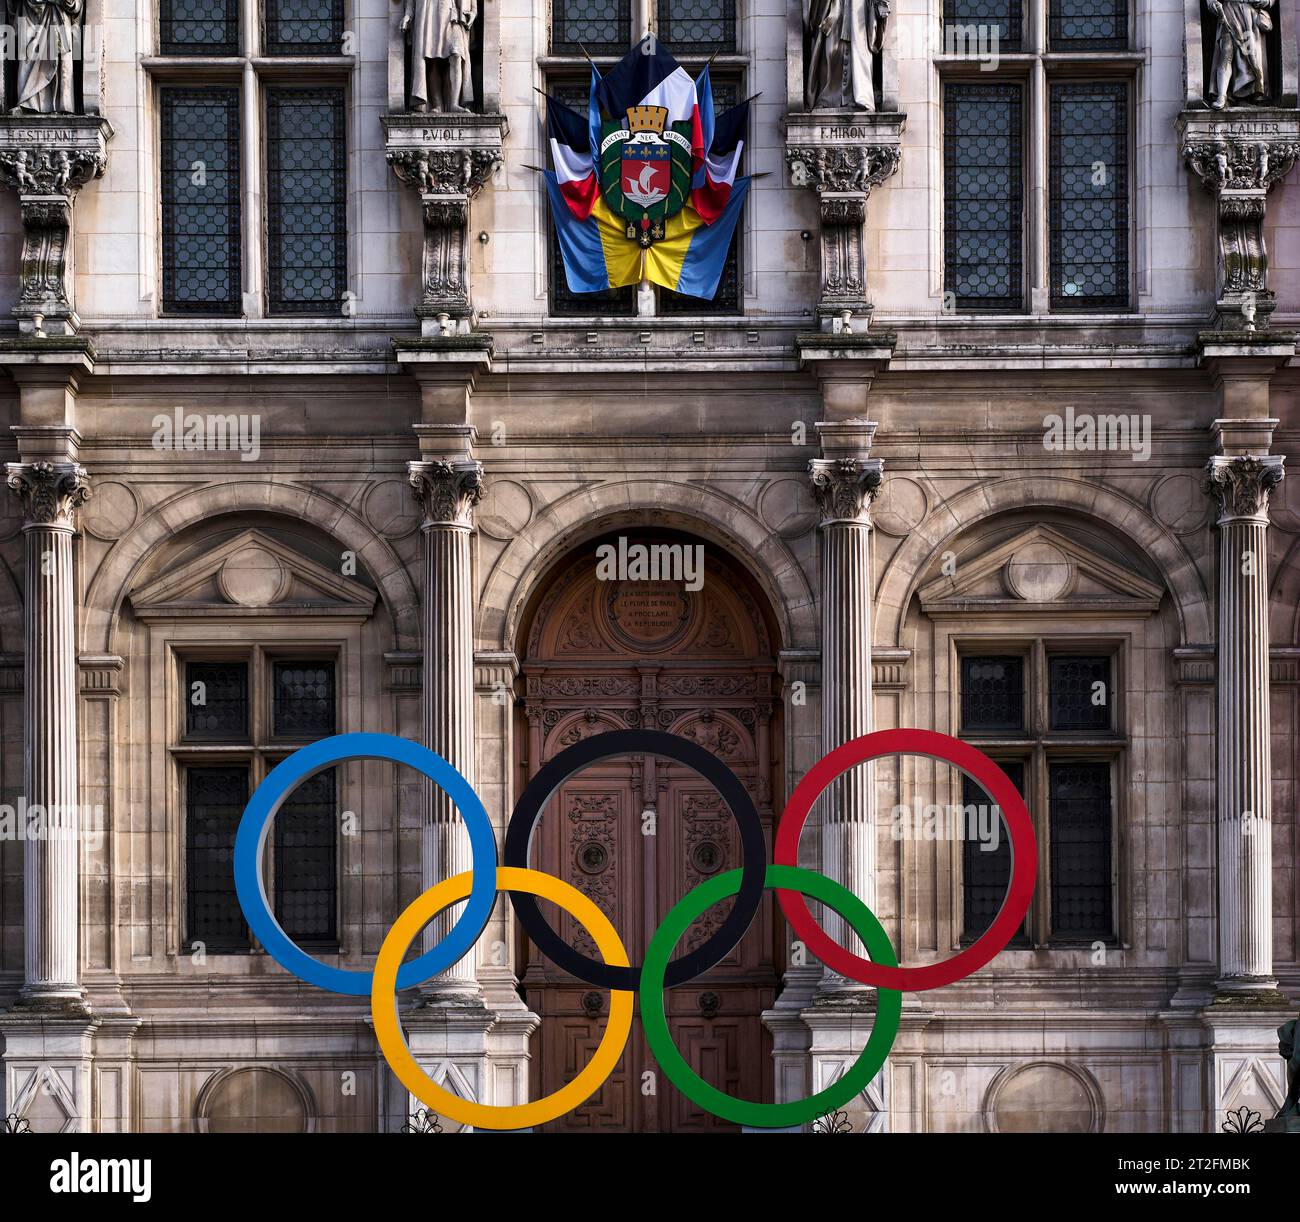 Olympic Rings, Olympic Games, Logo, on the occasion of the 2024 Olympics in Paris, City Hall, Hotel de Ville, Paris, France Stock Photo